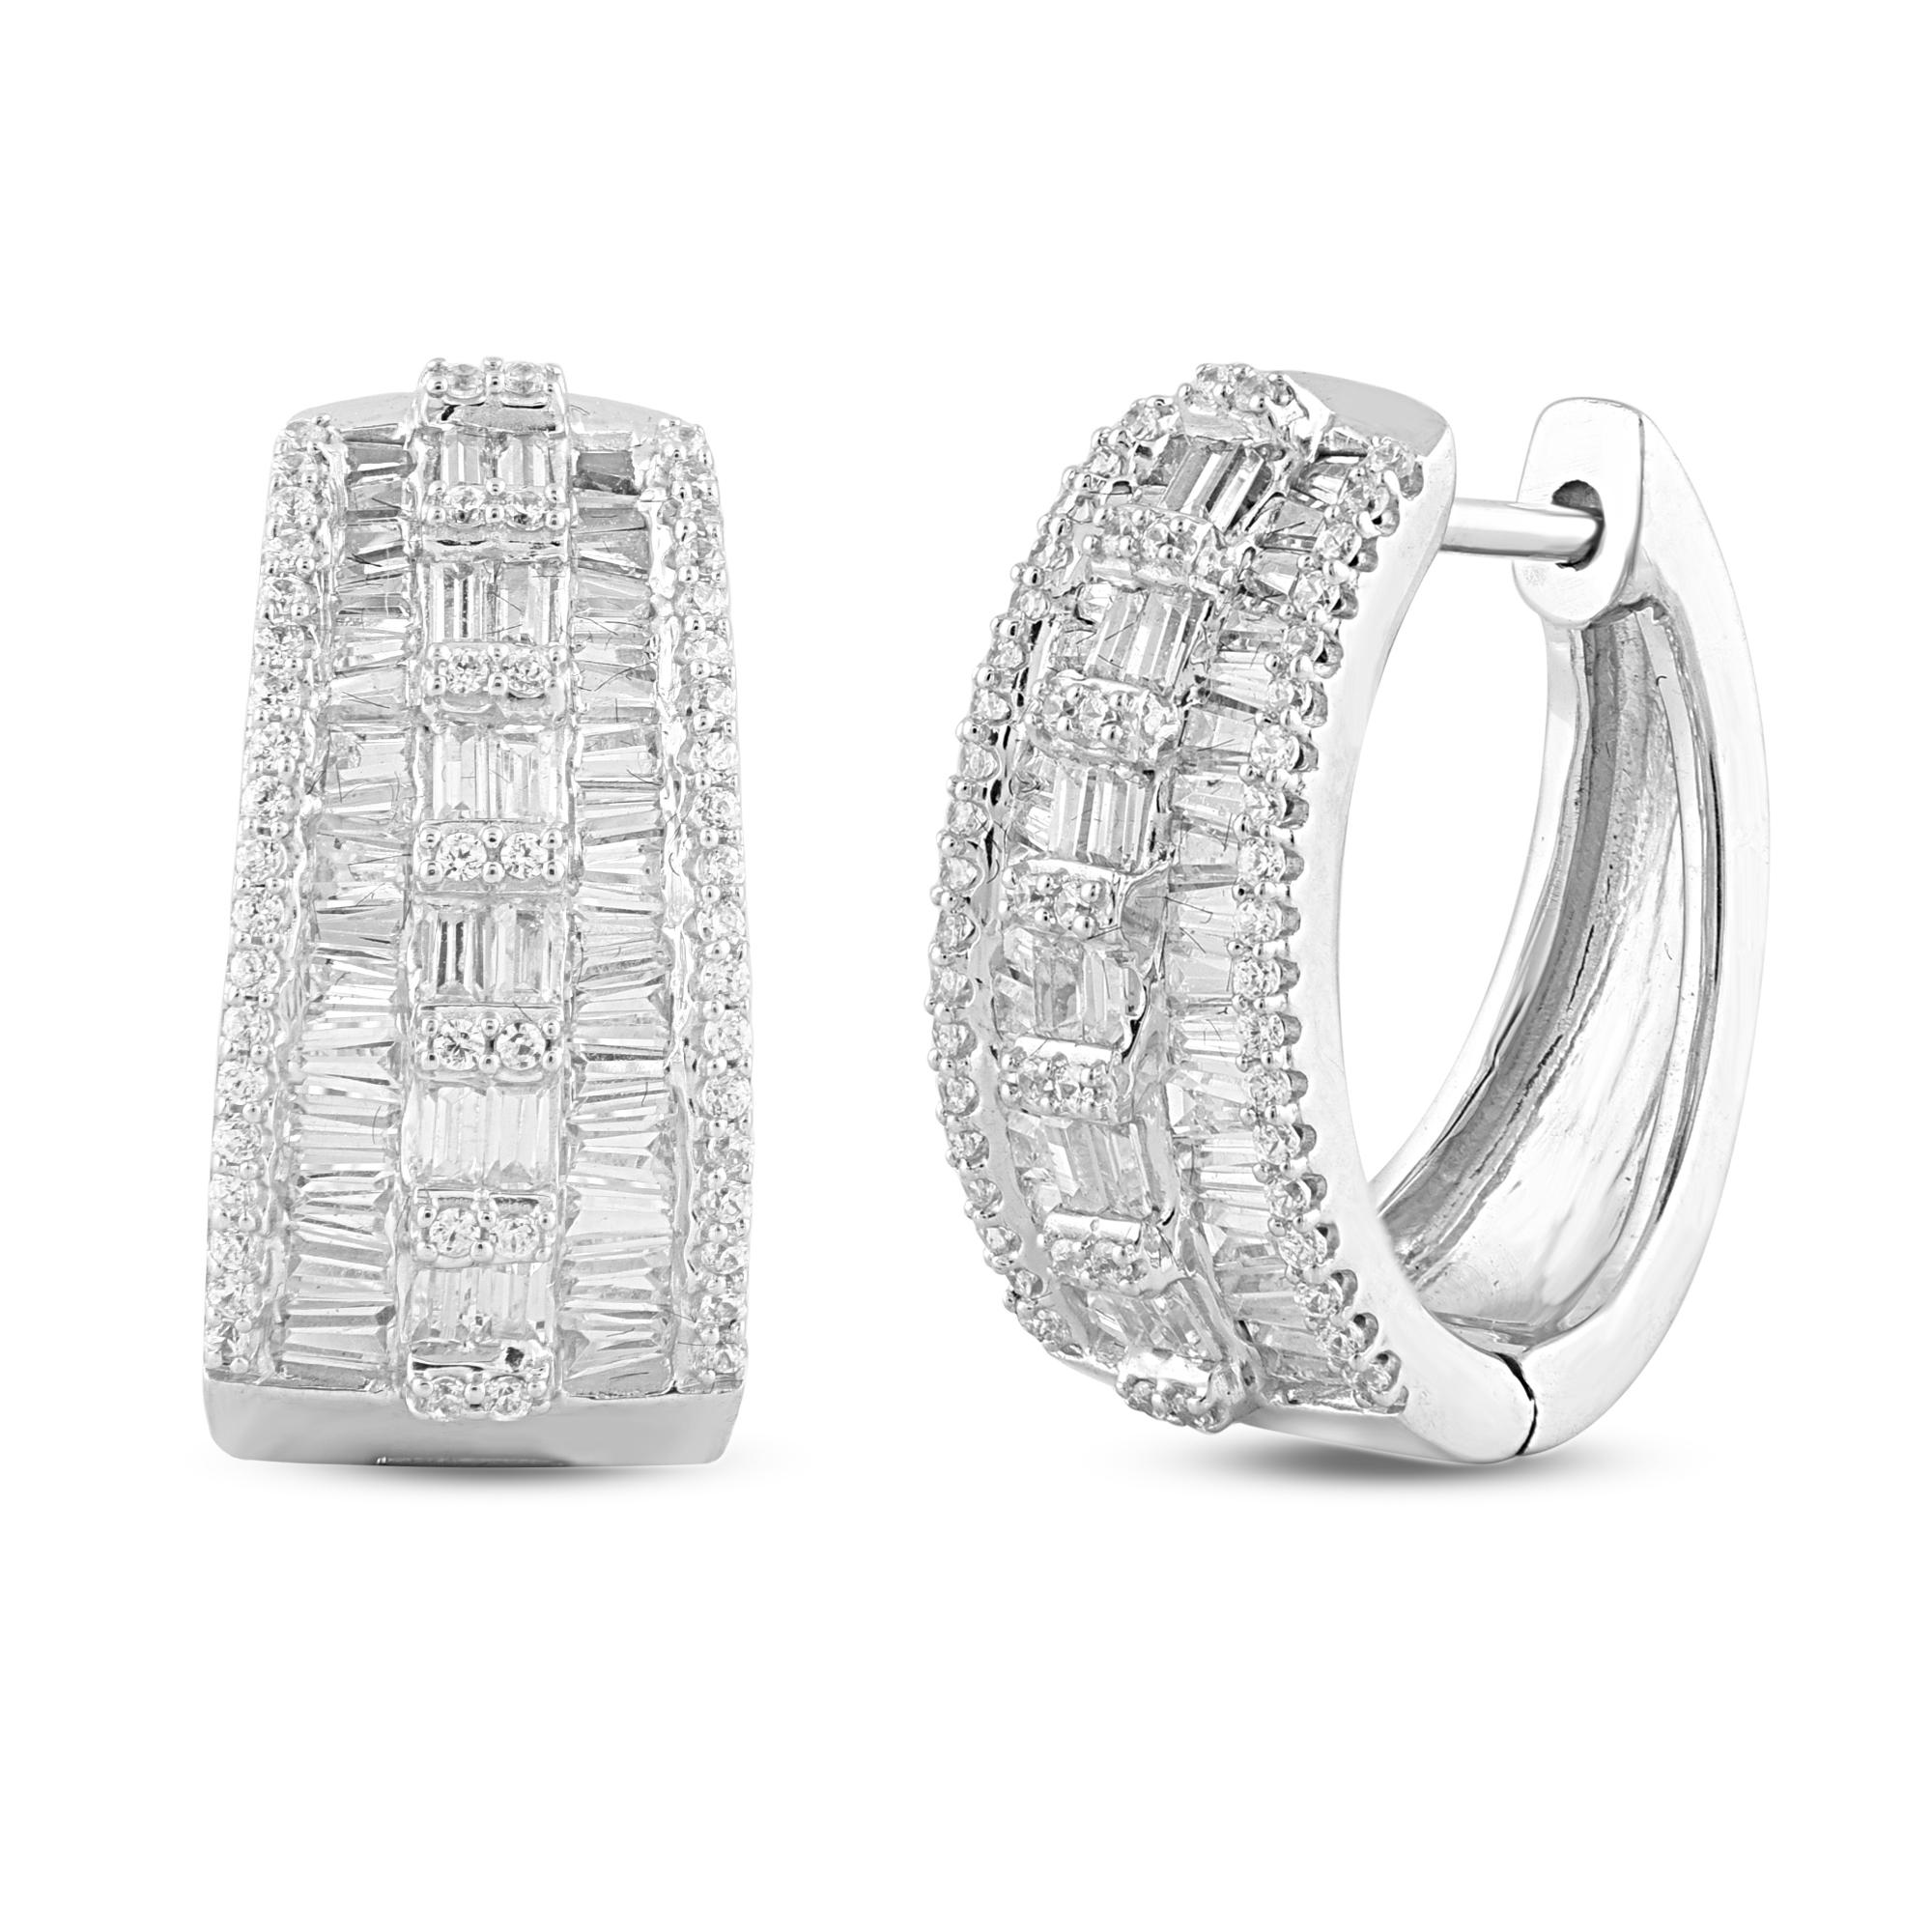 Bring charm to your look with this diamond huggie hoop earrings. This earring is beautifully designed and studded with 204 single cut round diamond and baguette diamonds set in prong & channel setting. The total diamond weight is 1.0 carat. The